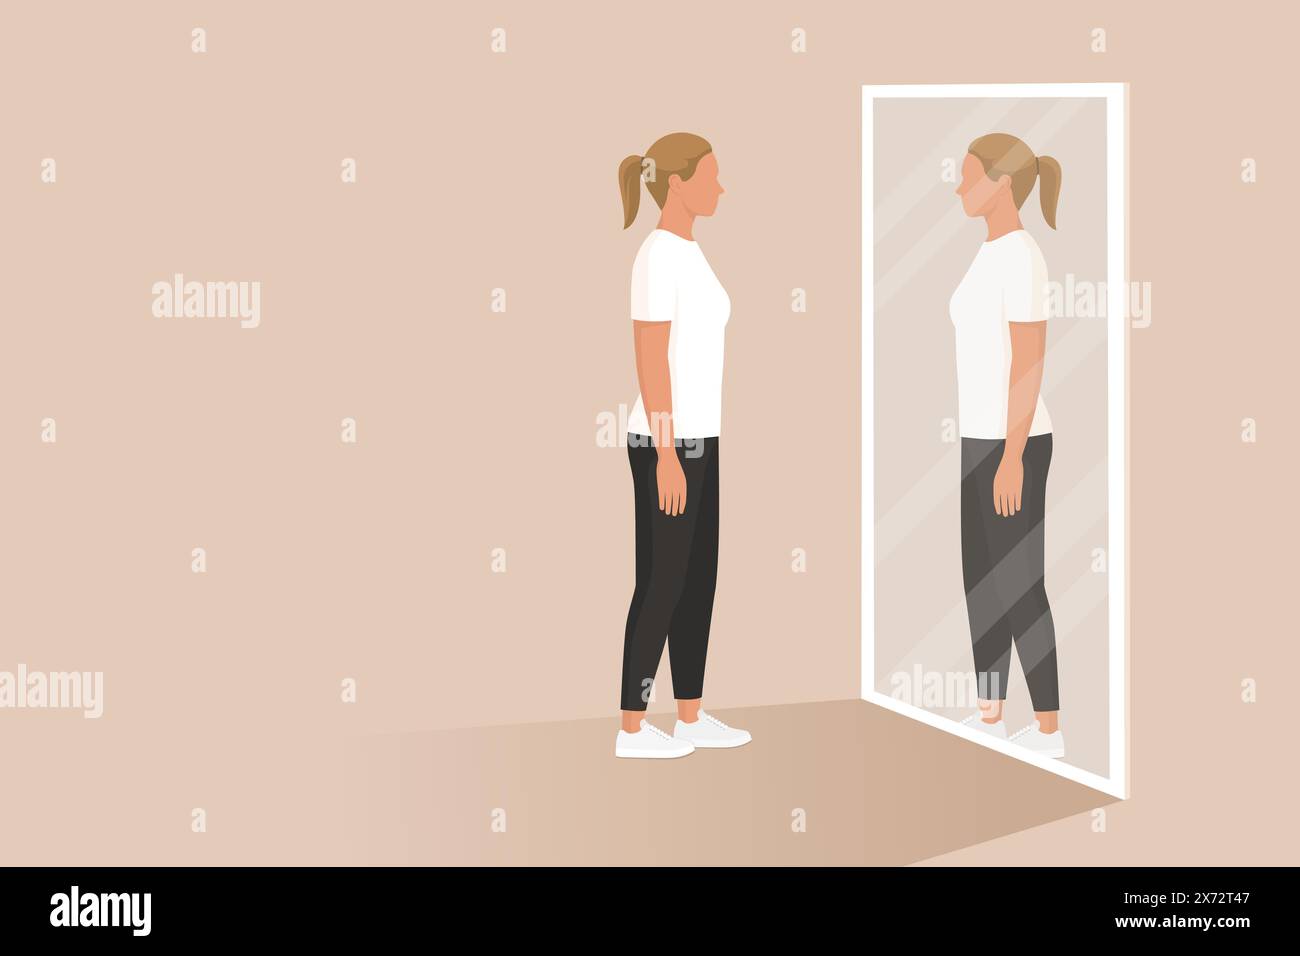 Young woman looking at herself in the mirror: identity and self-awareness concept Stock Vector